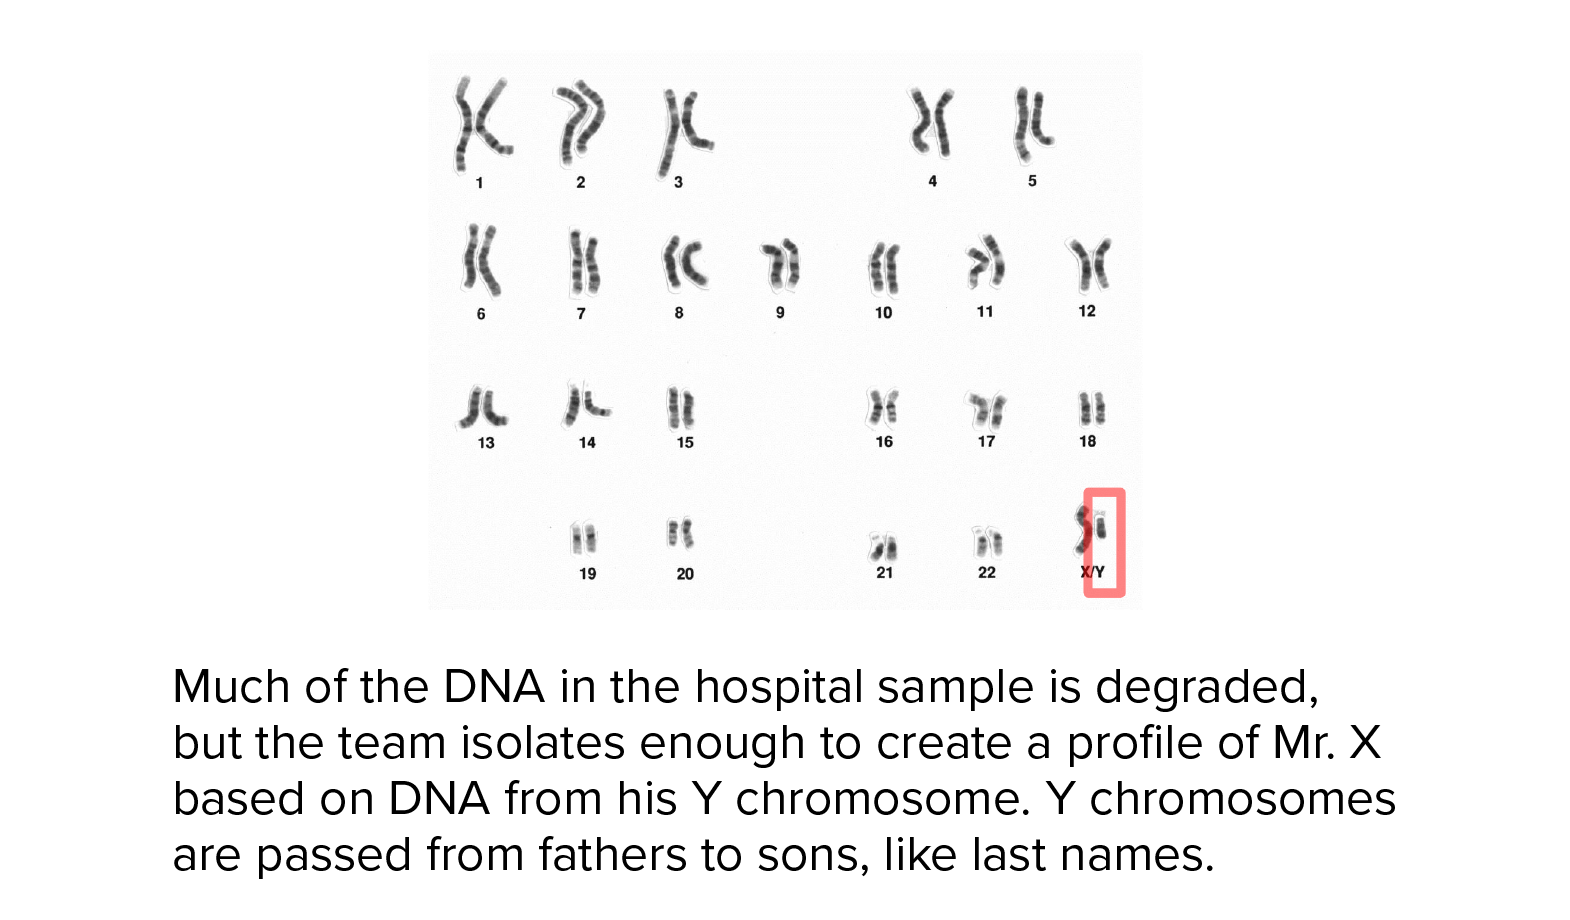 Much of the DNA in the hospital sample is degraded, but the team isolates enough to create a profile of Mr. X based on DNA from his Y chromosome. Y chromosomes are passed from fathers to sons, like last names.